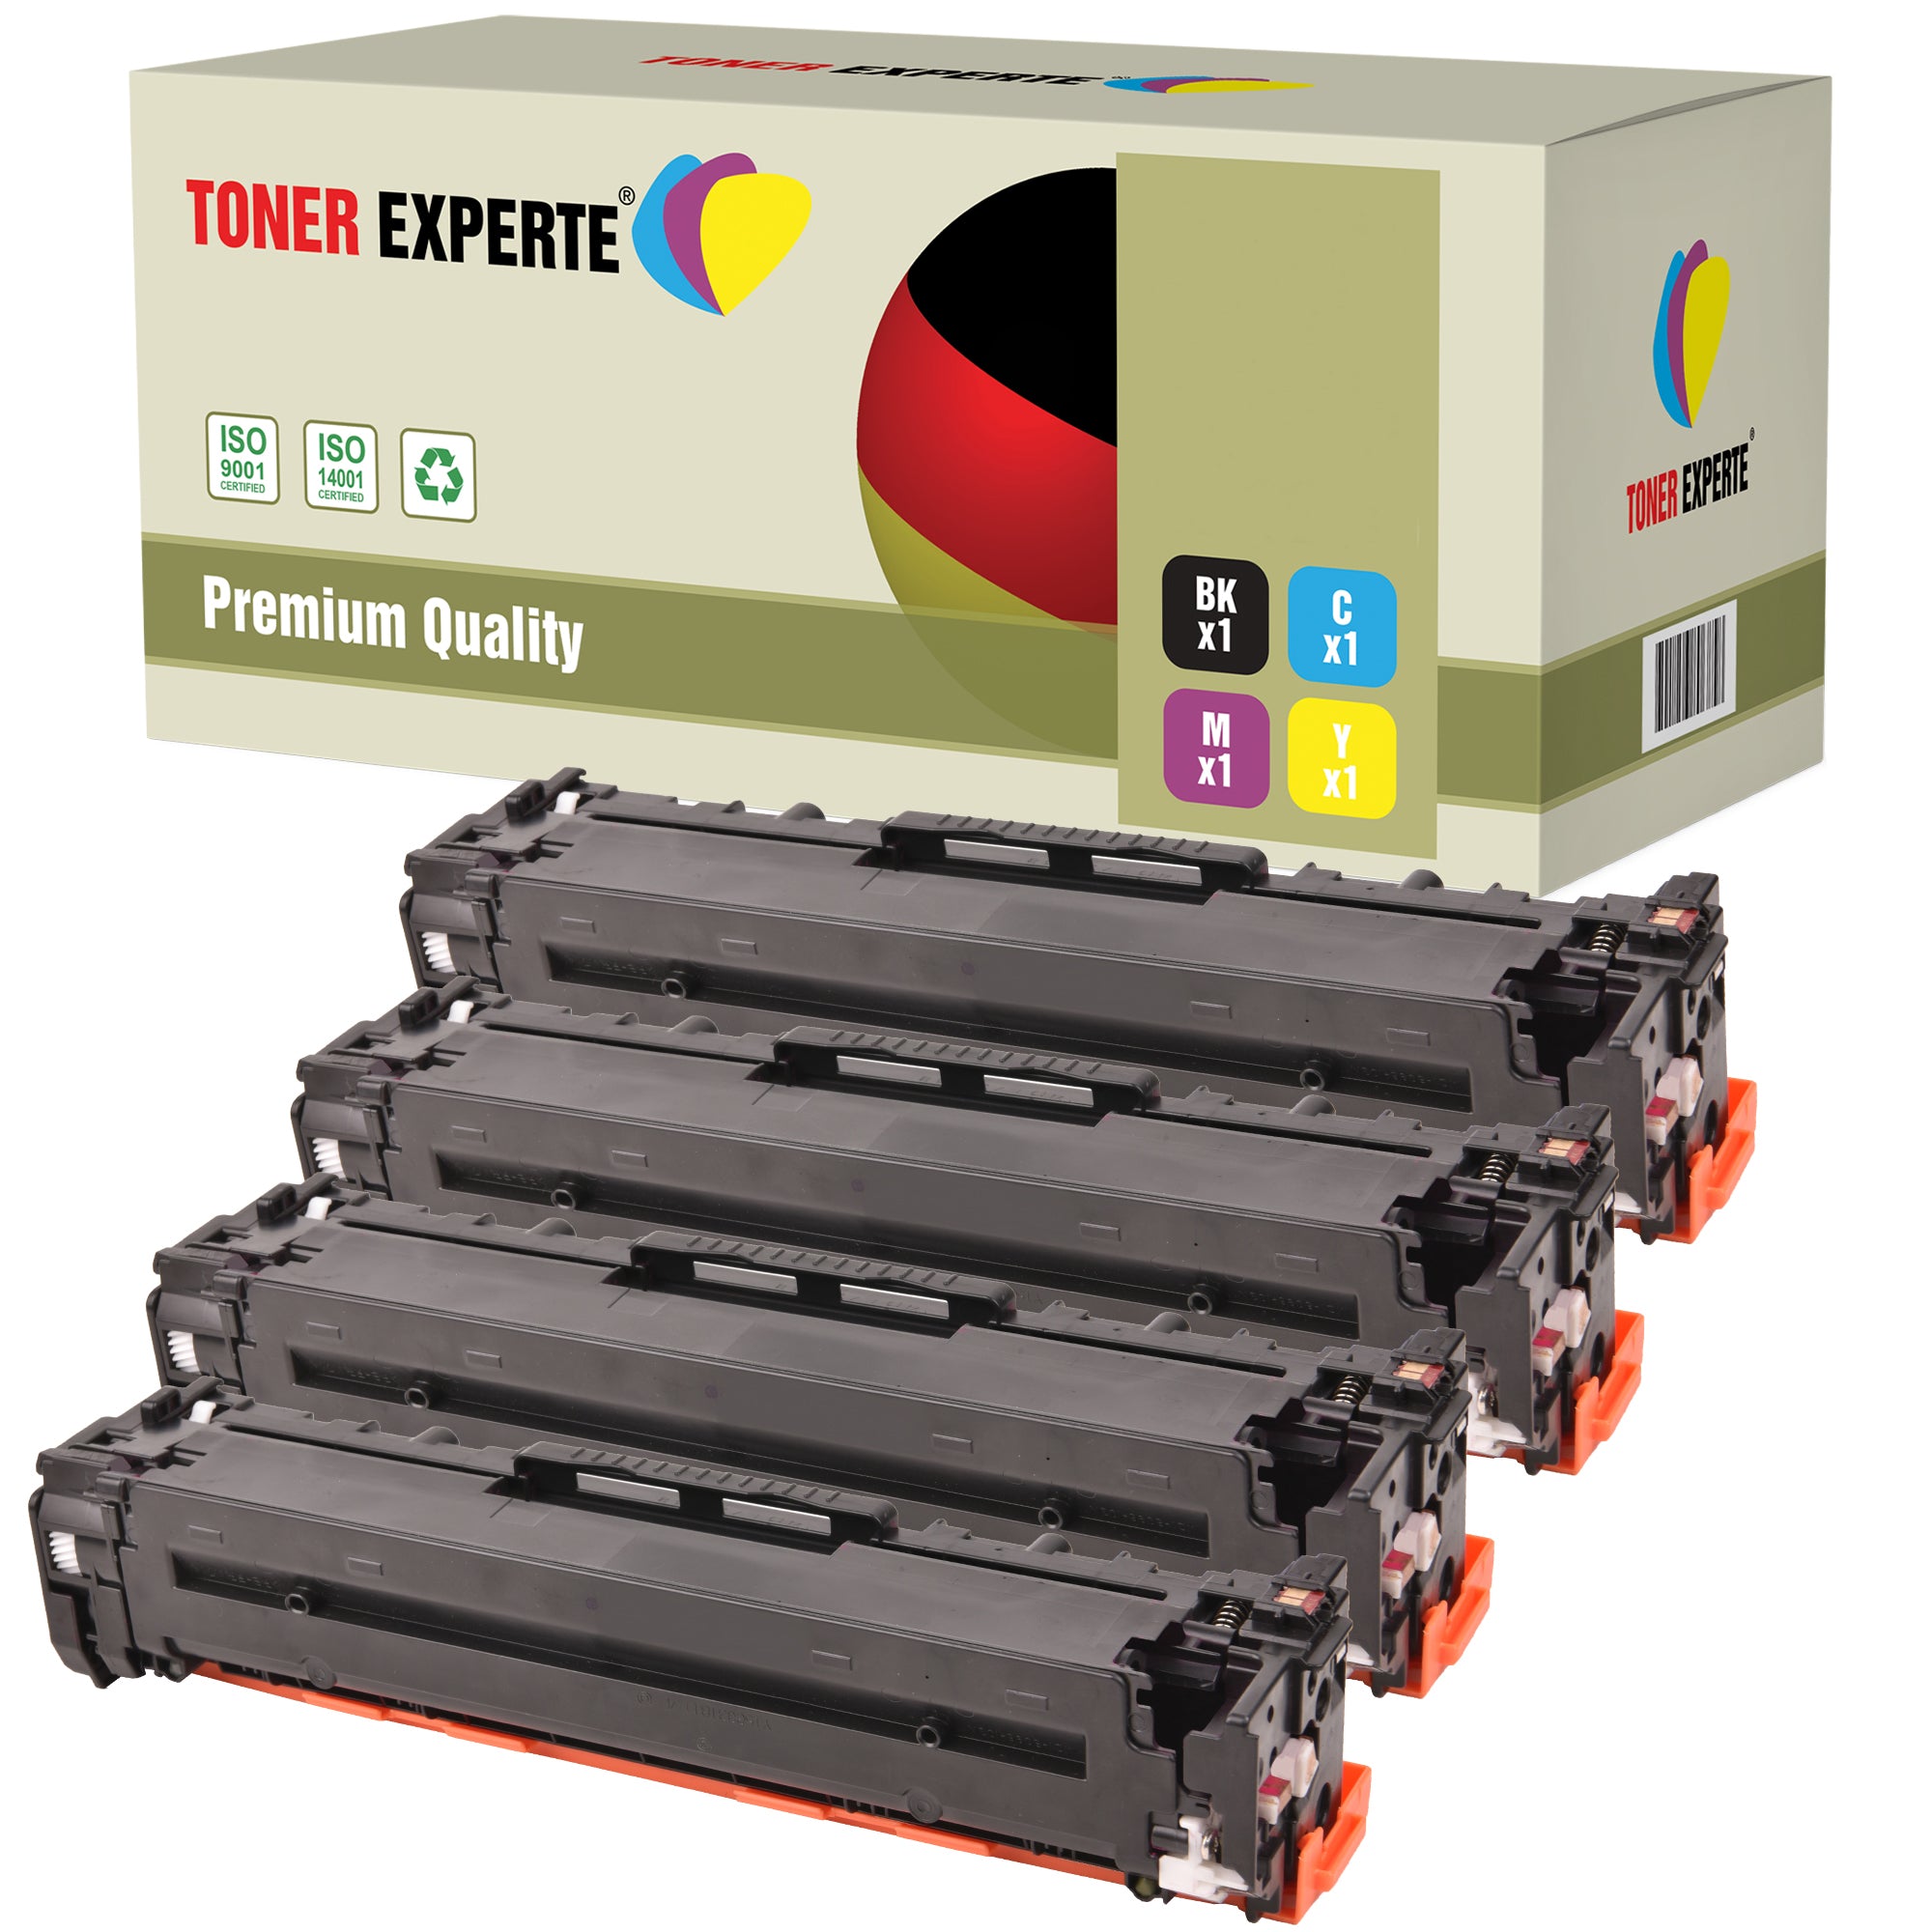 Toner Cartridges Replacement for HP 125A - Toner Experte